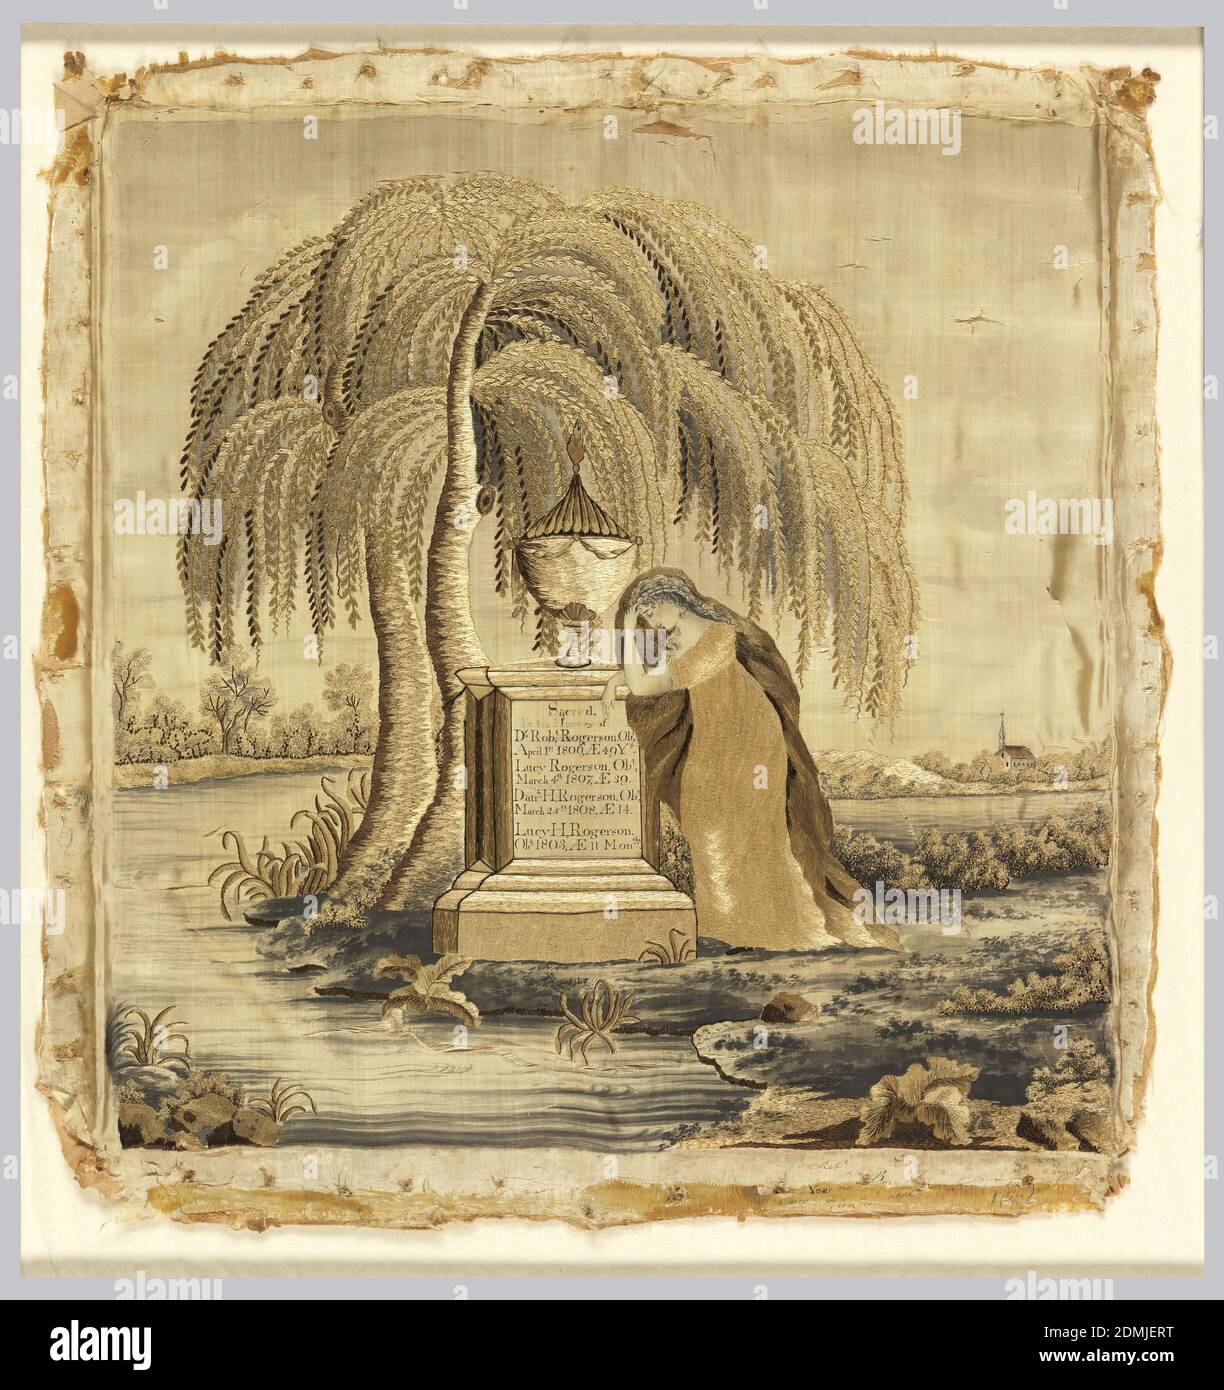 Mourning sampler, Medium: silk embroidery on silk foundation Technique: embroidered and painted on plain weave Label: silk, painted and embroidered with silk, Embroidered picture, nearly square in format, depicting a mourning female figure leaning on a tomb surmounted by an urn under the shade of a weeping willow. The tomb bears the inscription:, Sacred to the memory of Dr. Robt Rogerson. obt. April 1st 1806, AE 49 y's. Lucy Rogerson. obt. March 4th, 1807, AE 39. Danl. H. Rogerson. obt., March 25th, 1808, AE 14. Lucy H. Rogerson. obt. 1803, AE 11 months., Embroidered in tan silk Stock Photo